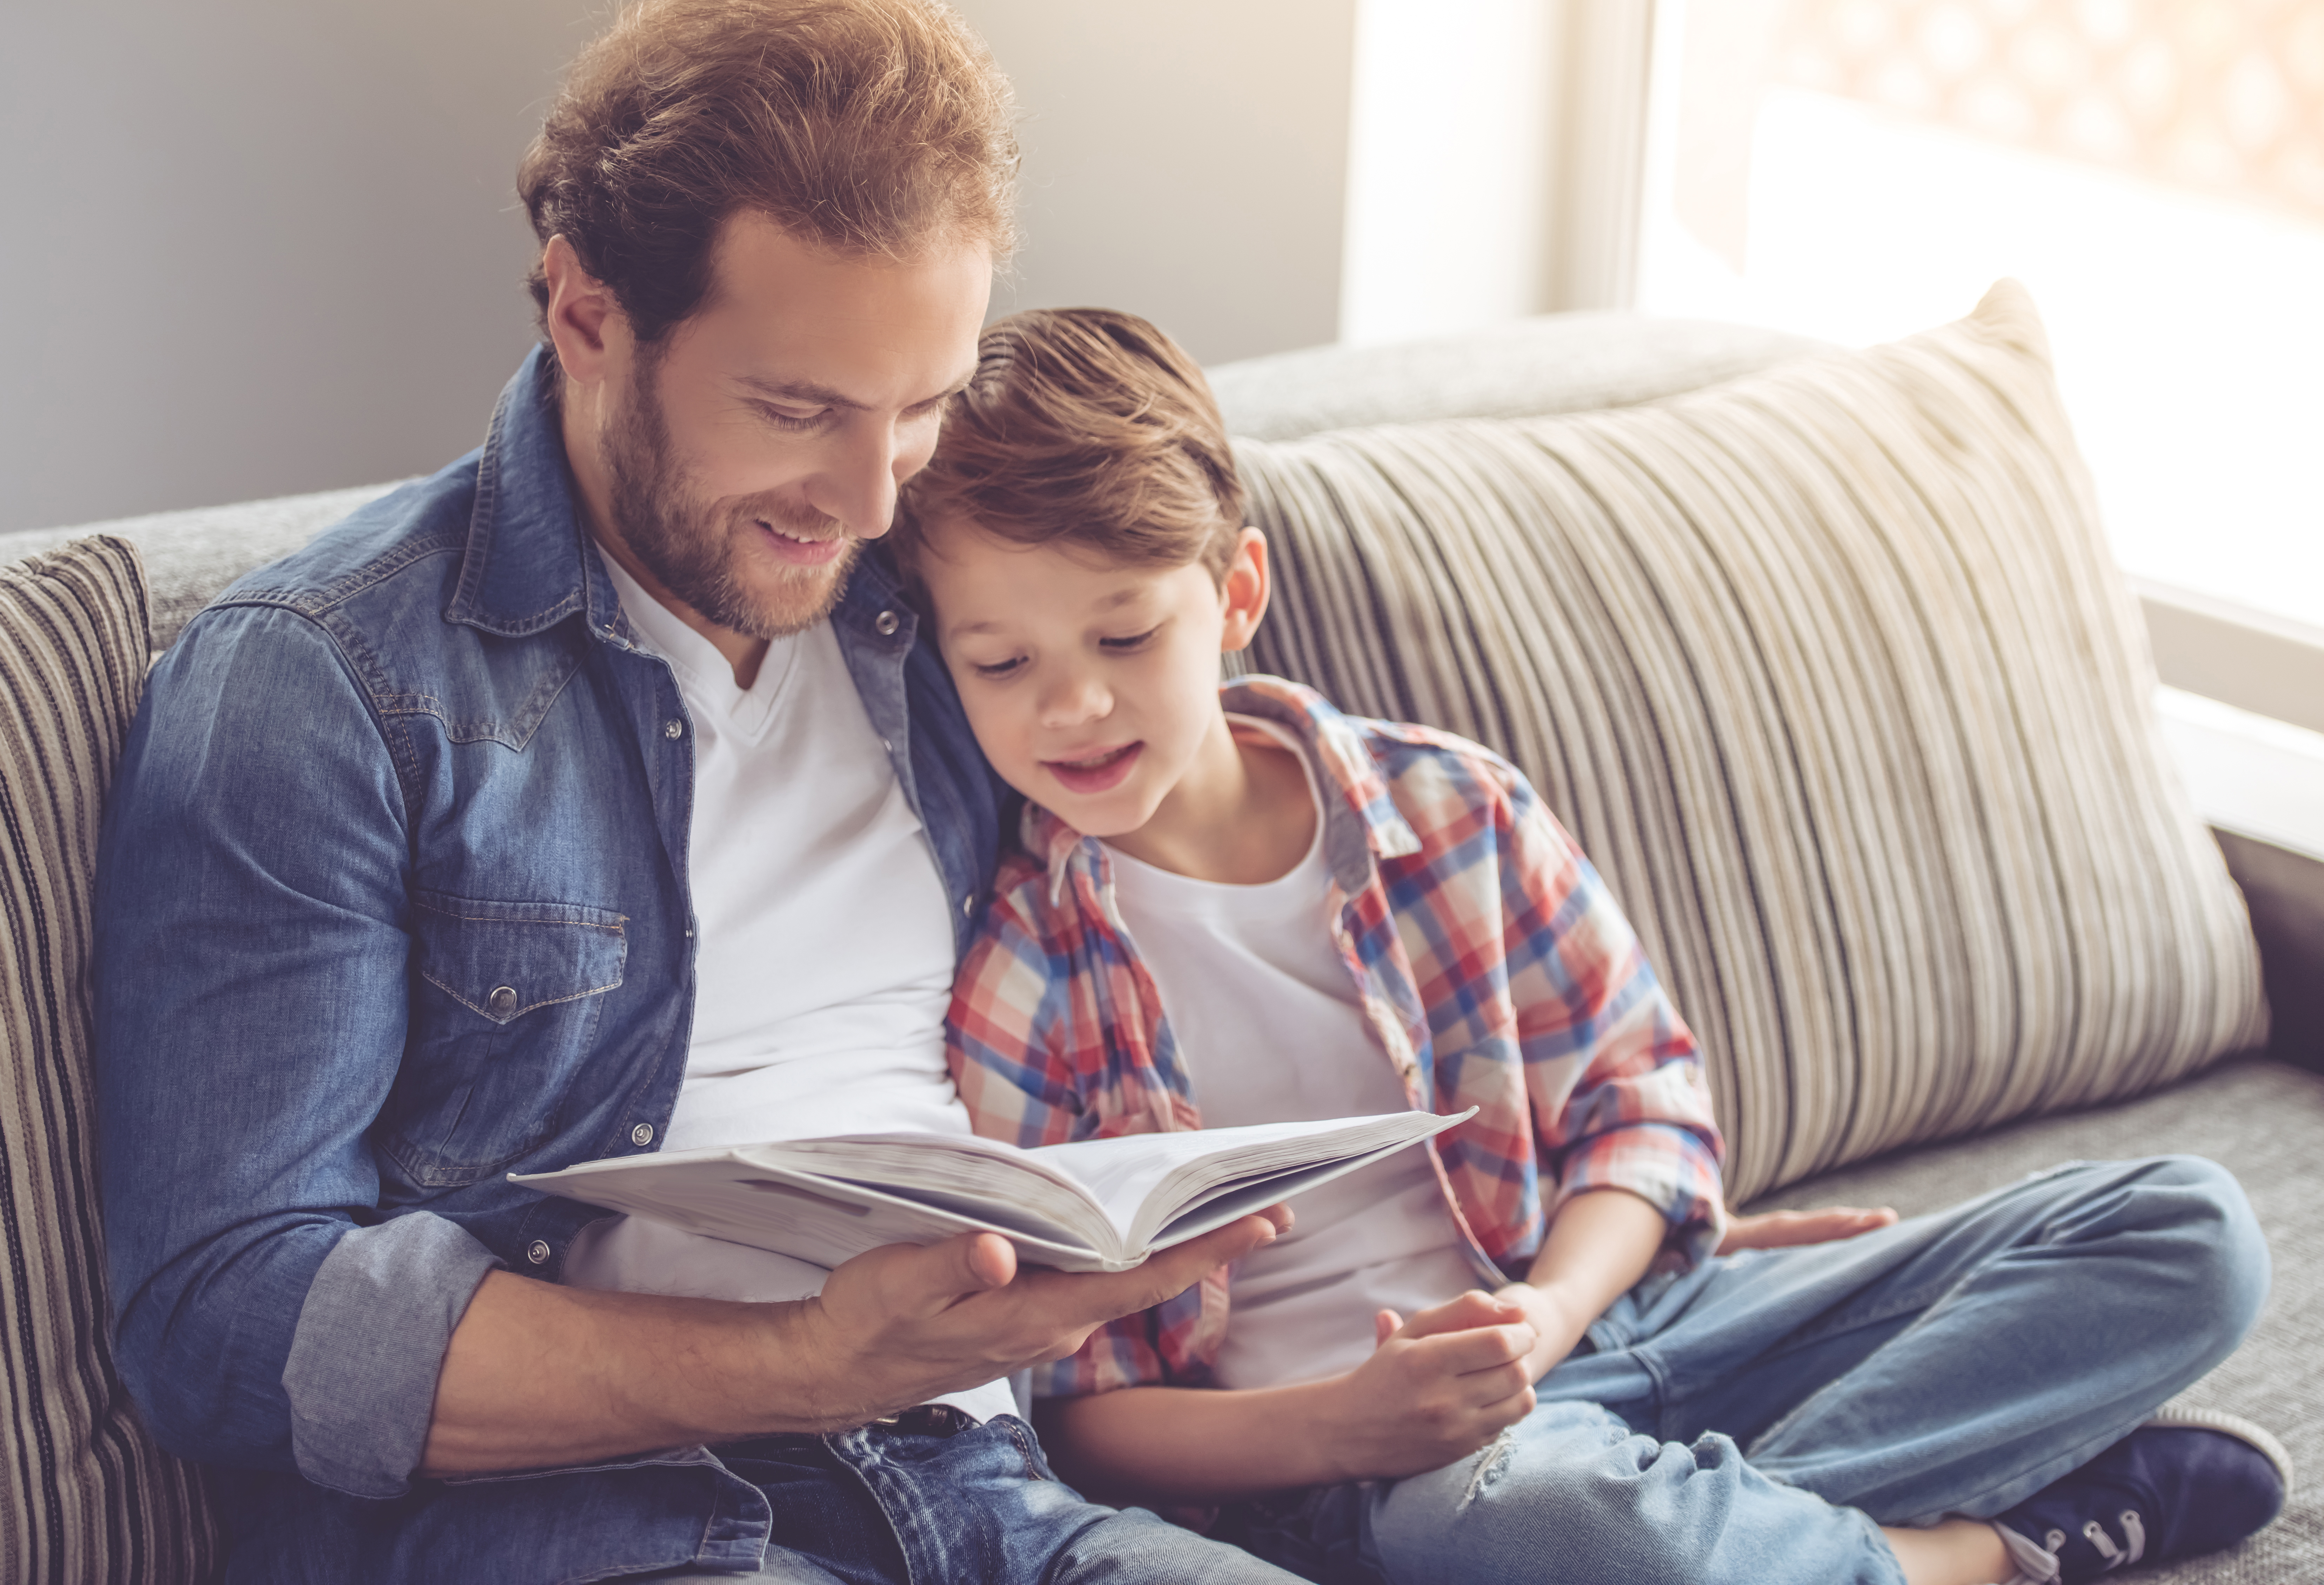 Father and son reading a book and smiling | Source: Shutterstock